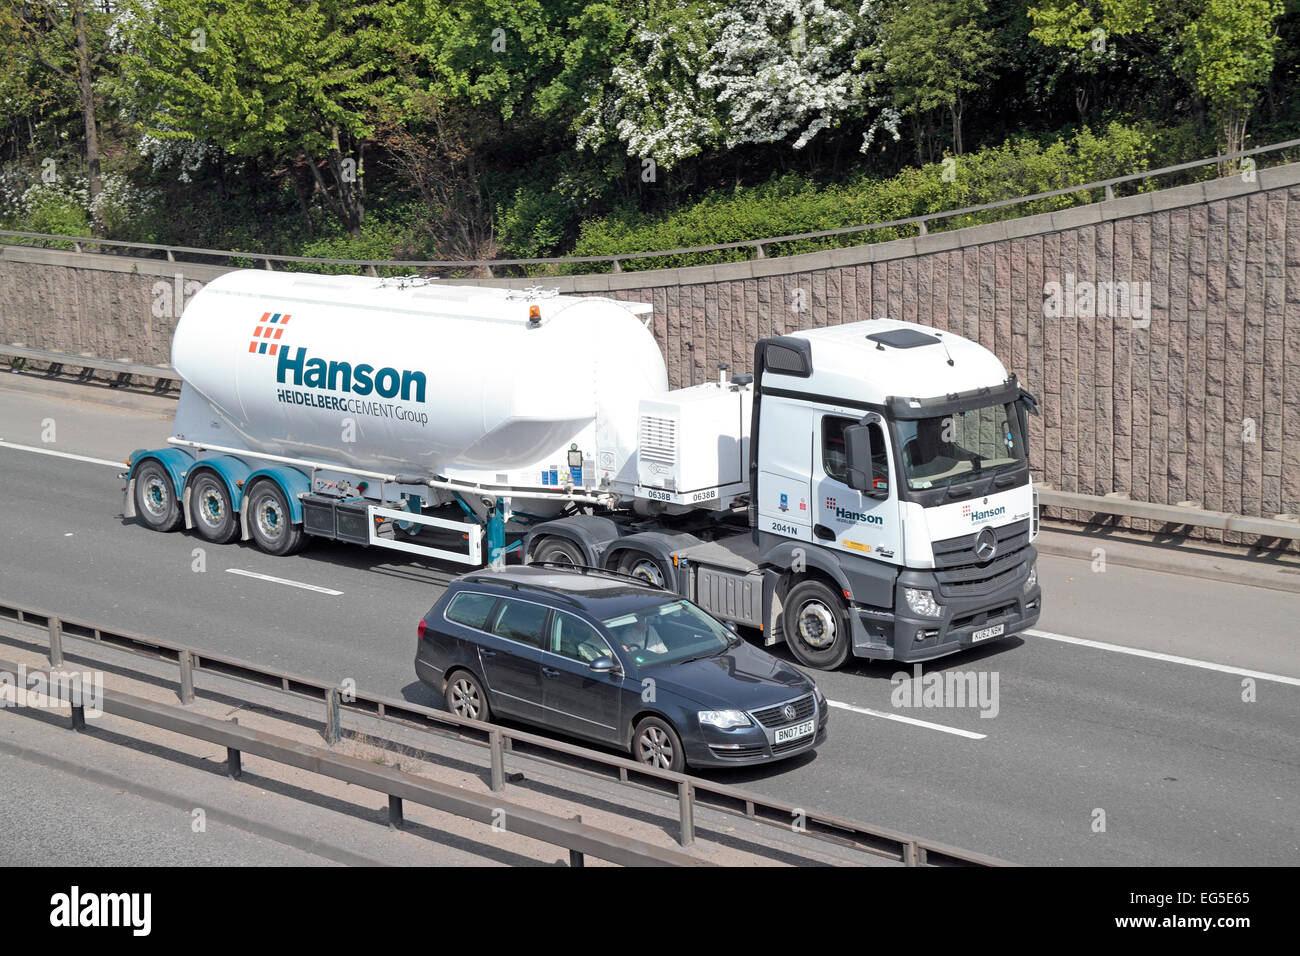 A Hanson (Heidelberg Cement Group) lorry traveling on the A40 in West London. Stock Photo